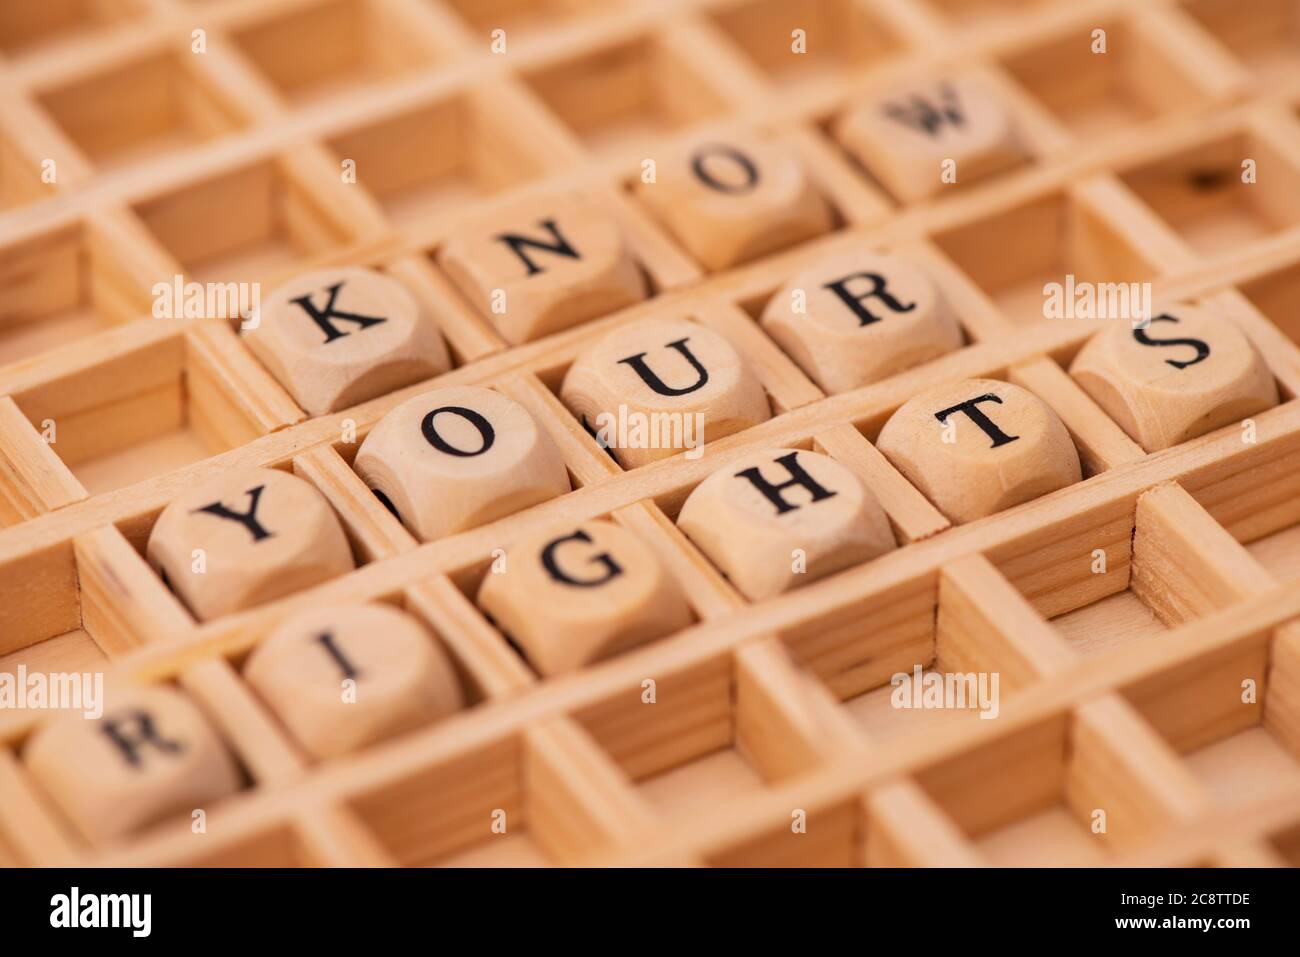 Word Cloud für Know Your Rights Stockfoto